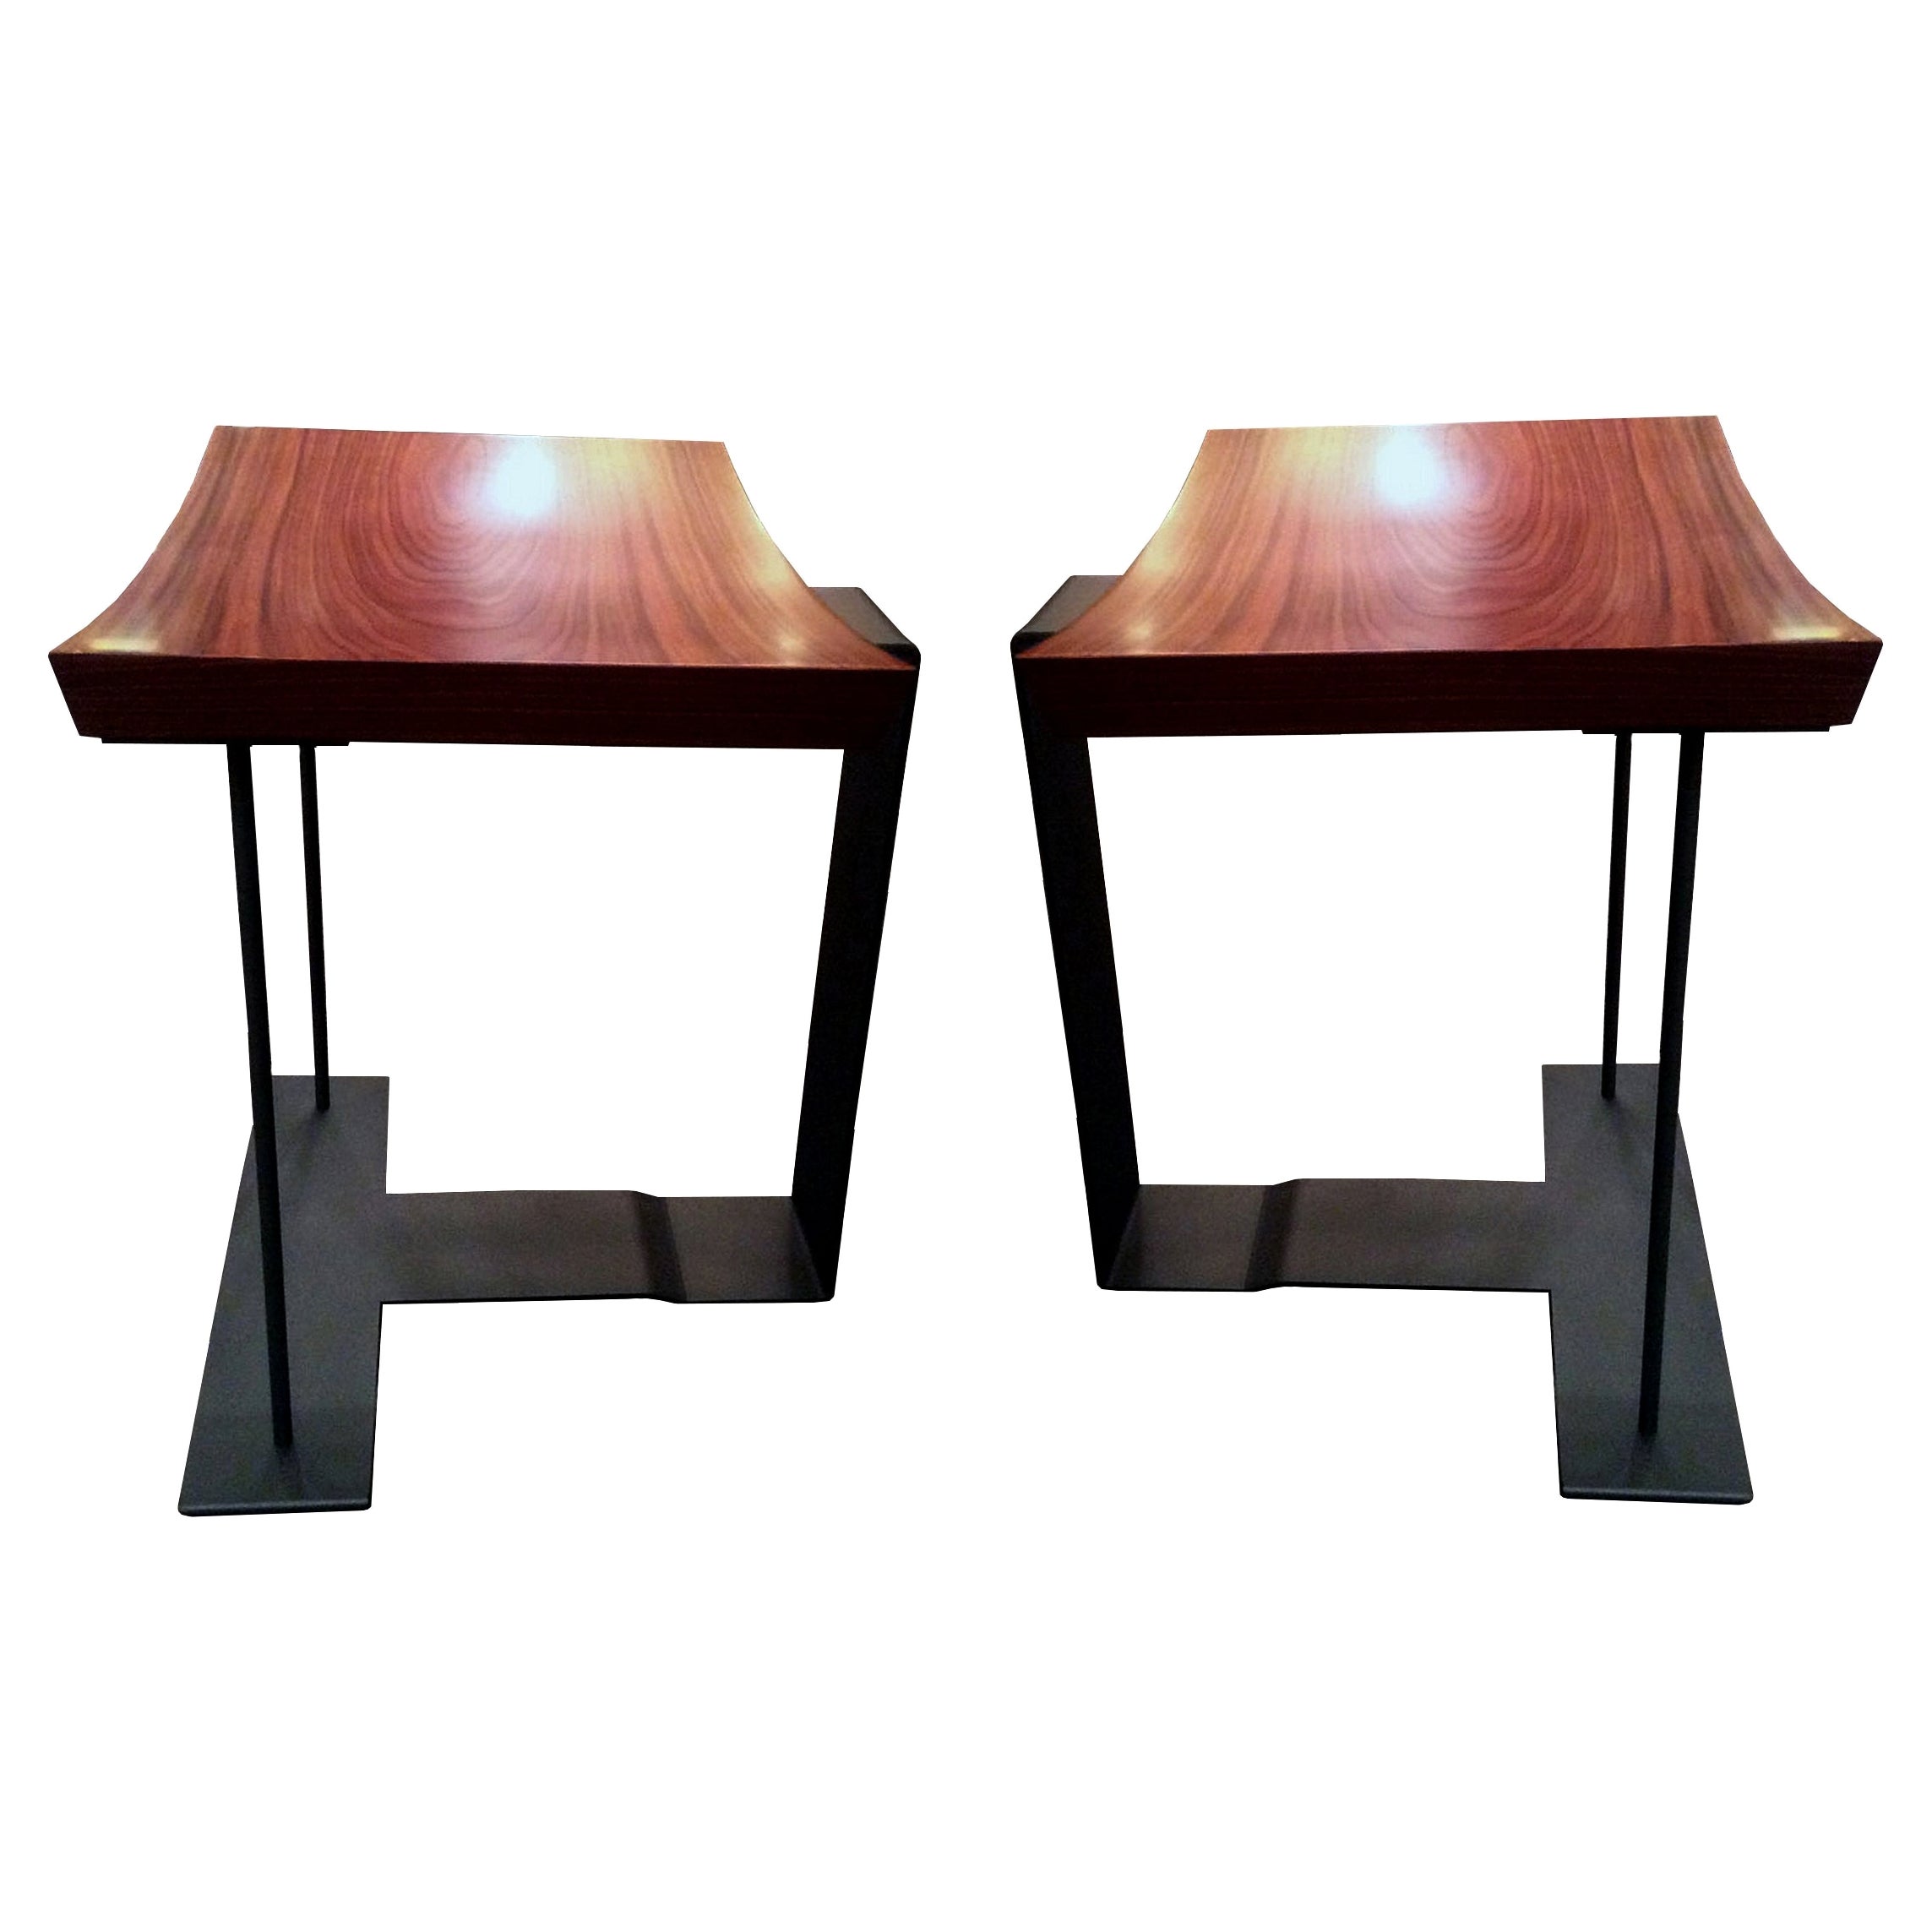 Two stools, model "T 1927", by Pierre Chareau, Ecart International Edition